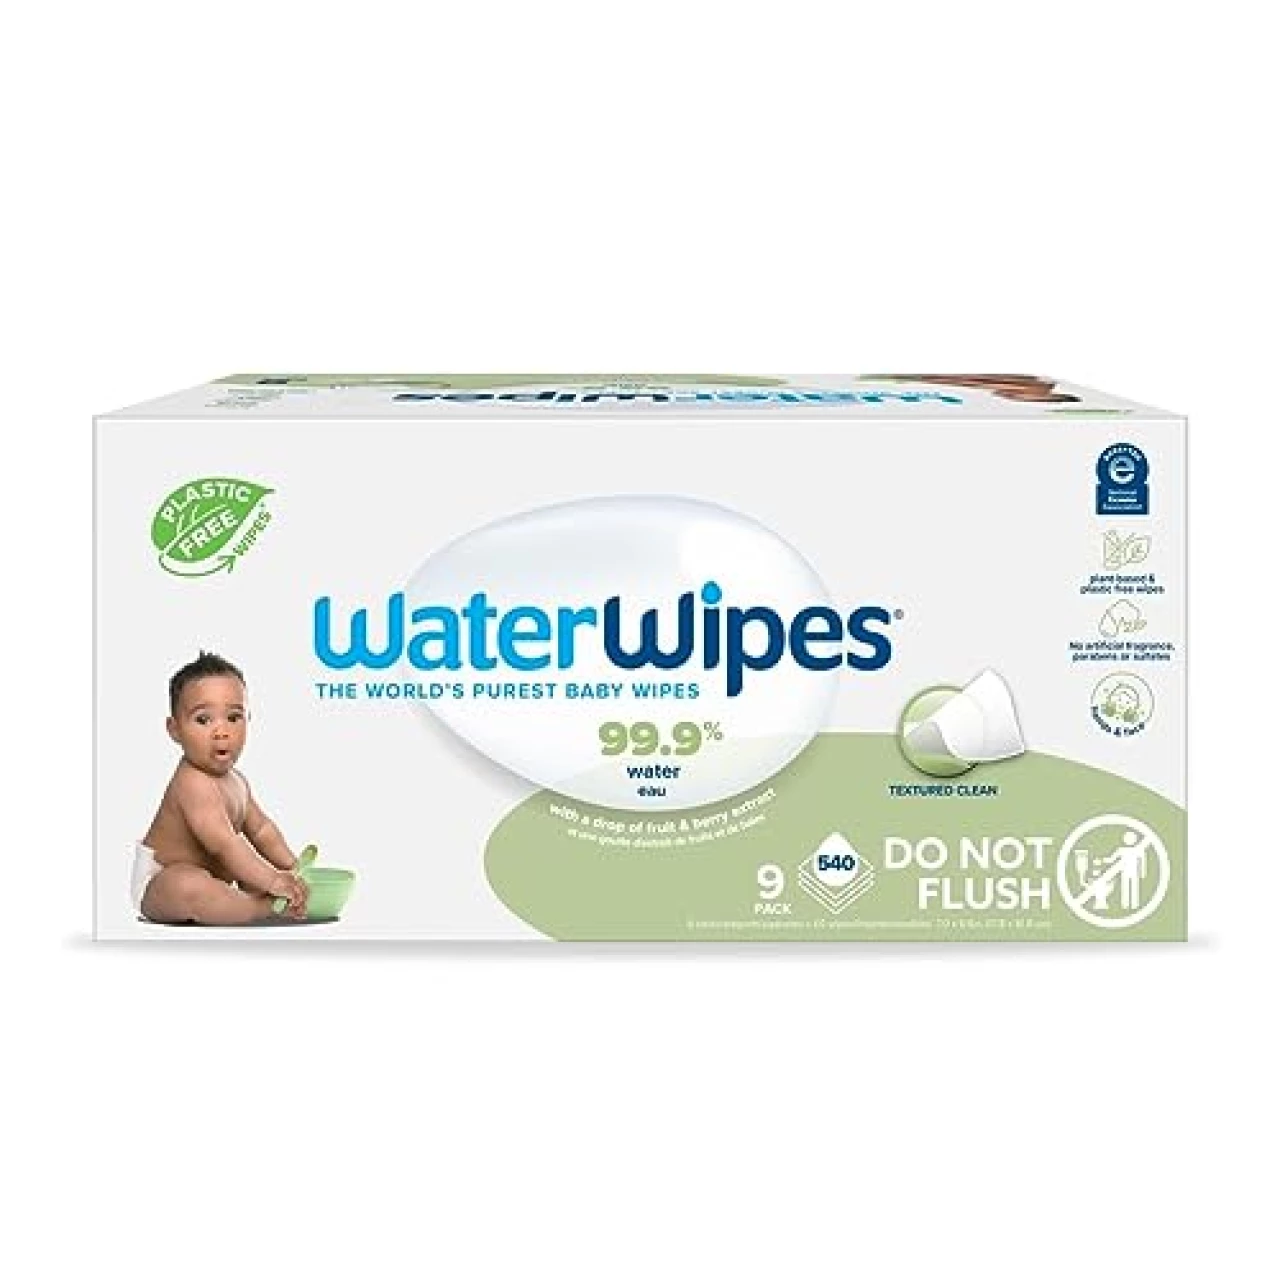 WaterWipes Plastic-Free Textured Clean, Toddler &amp; Baby Wipes, 99.9% Water Based Wipes, Unscented &amp; Hypoallergenic for Sensitive Skin, 540 Count (9 packs), Packaging May Vary